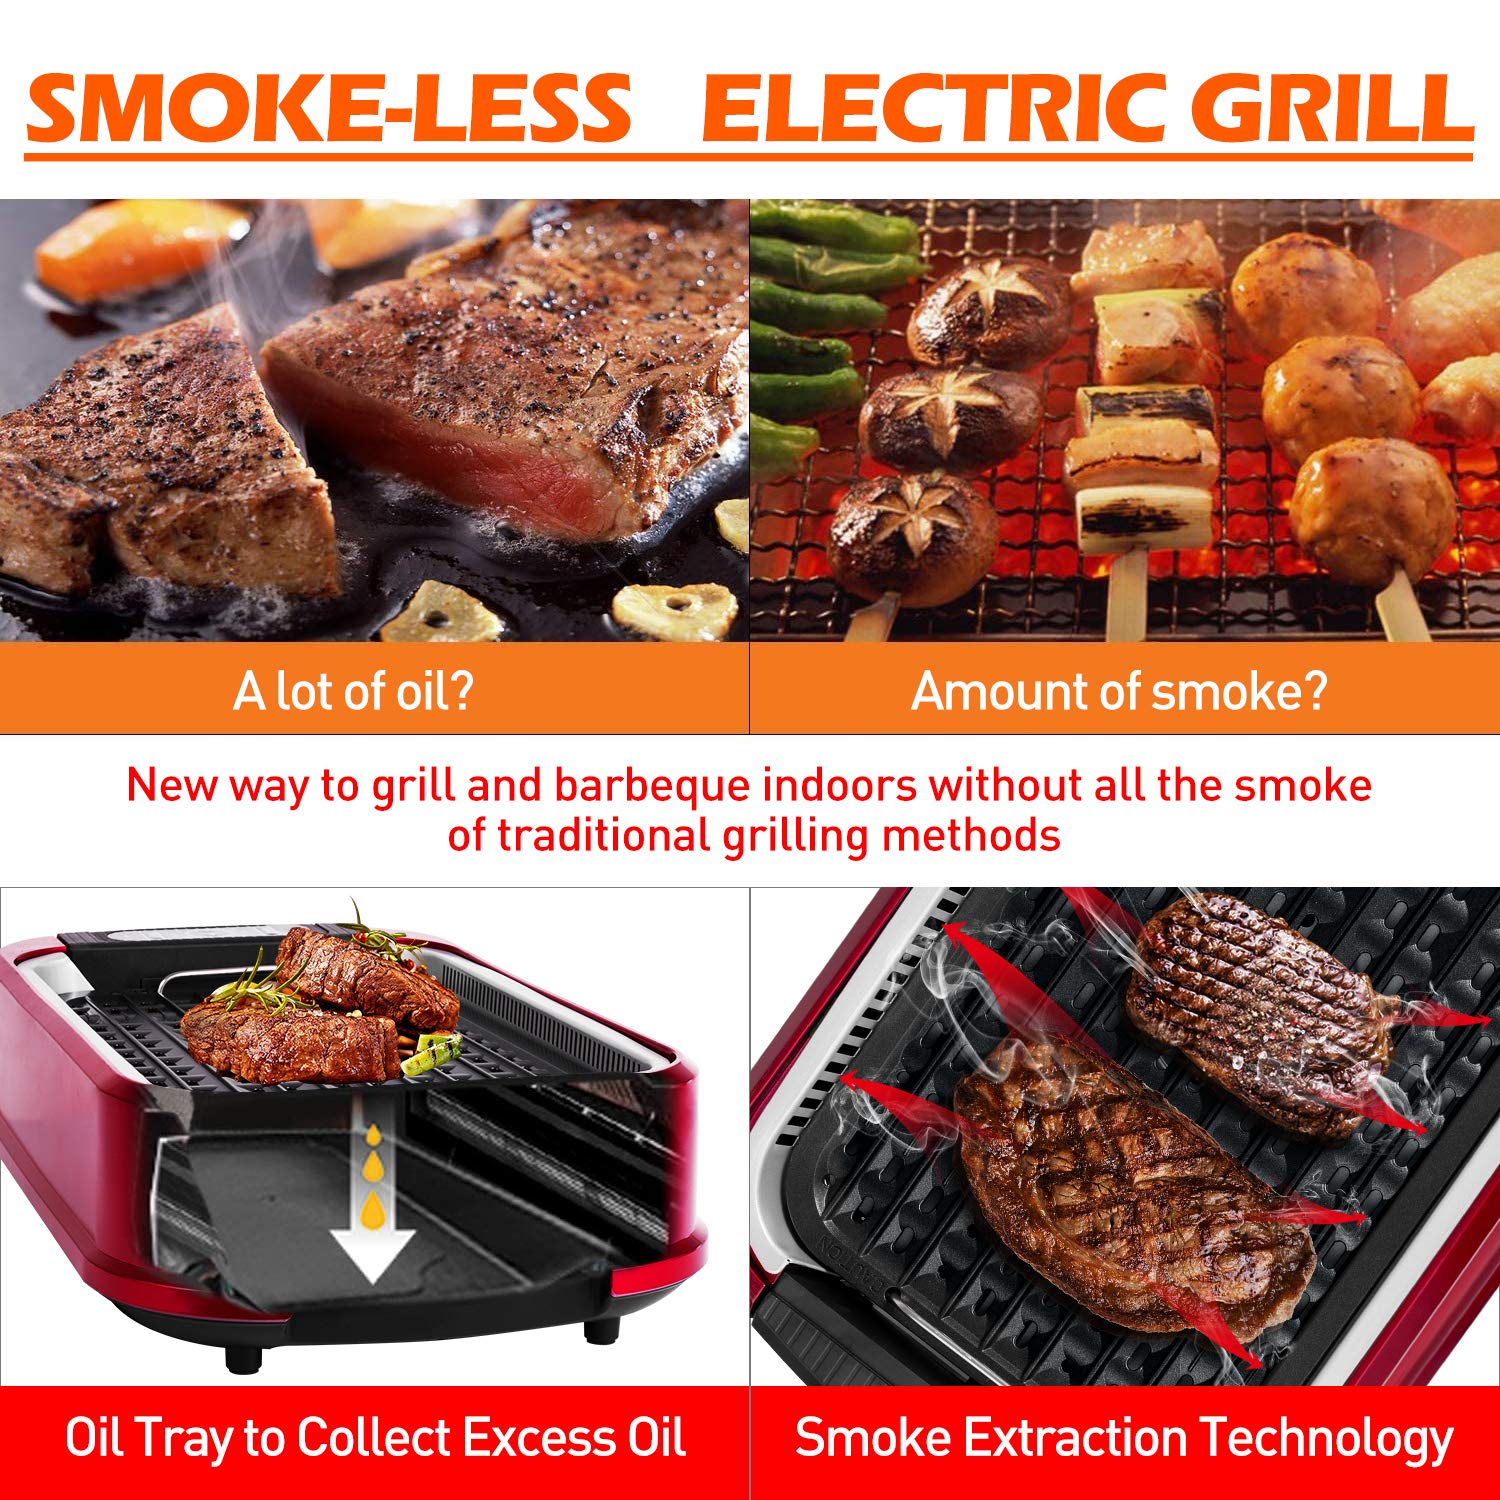 Clearance Depot - New Techwood Indoor Smokeless Grill 1500W